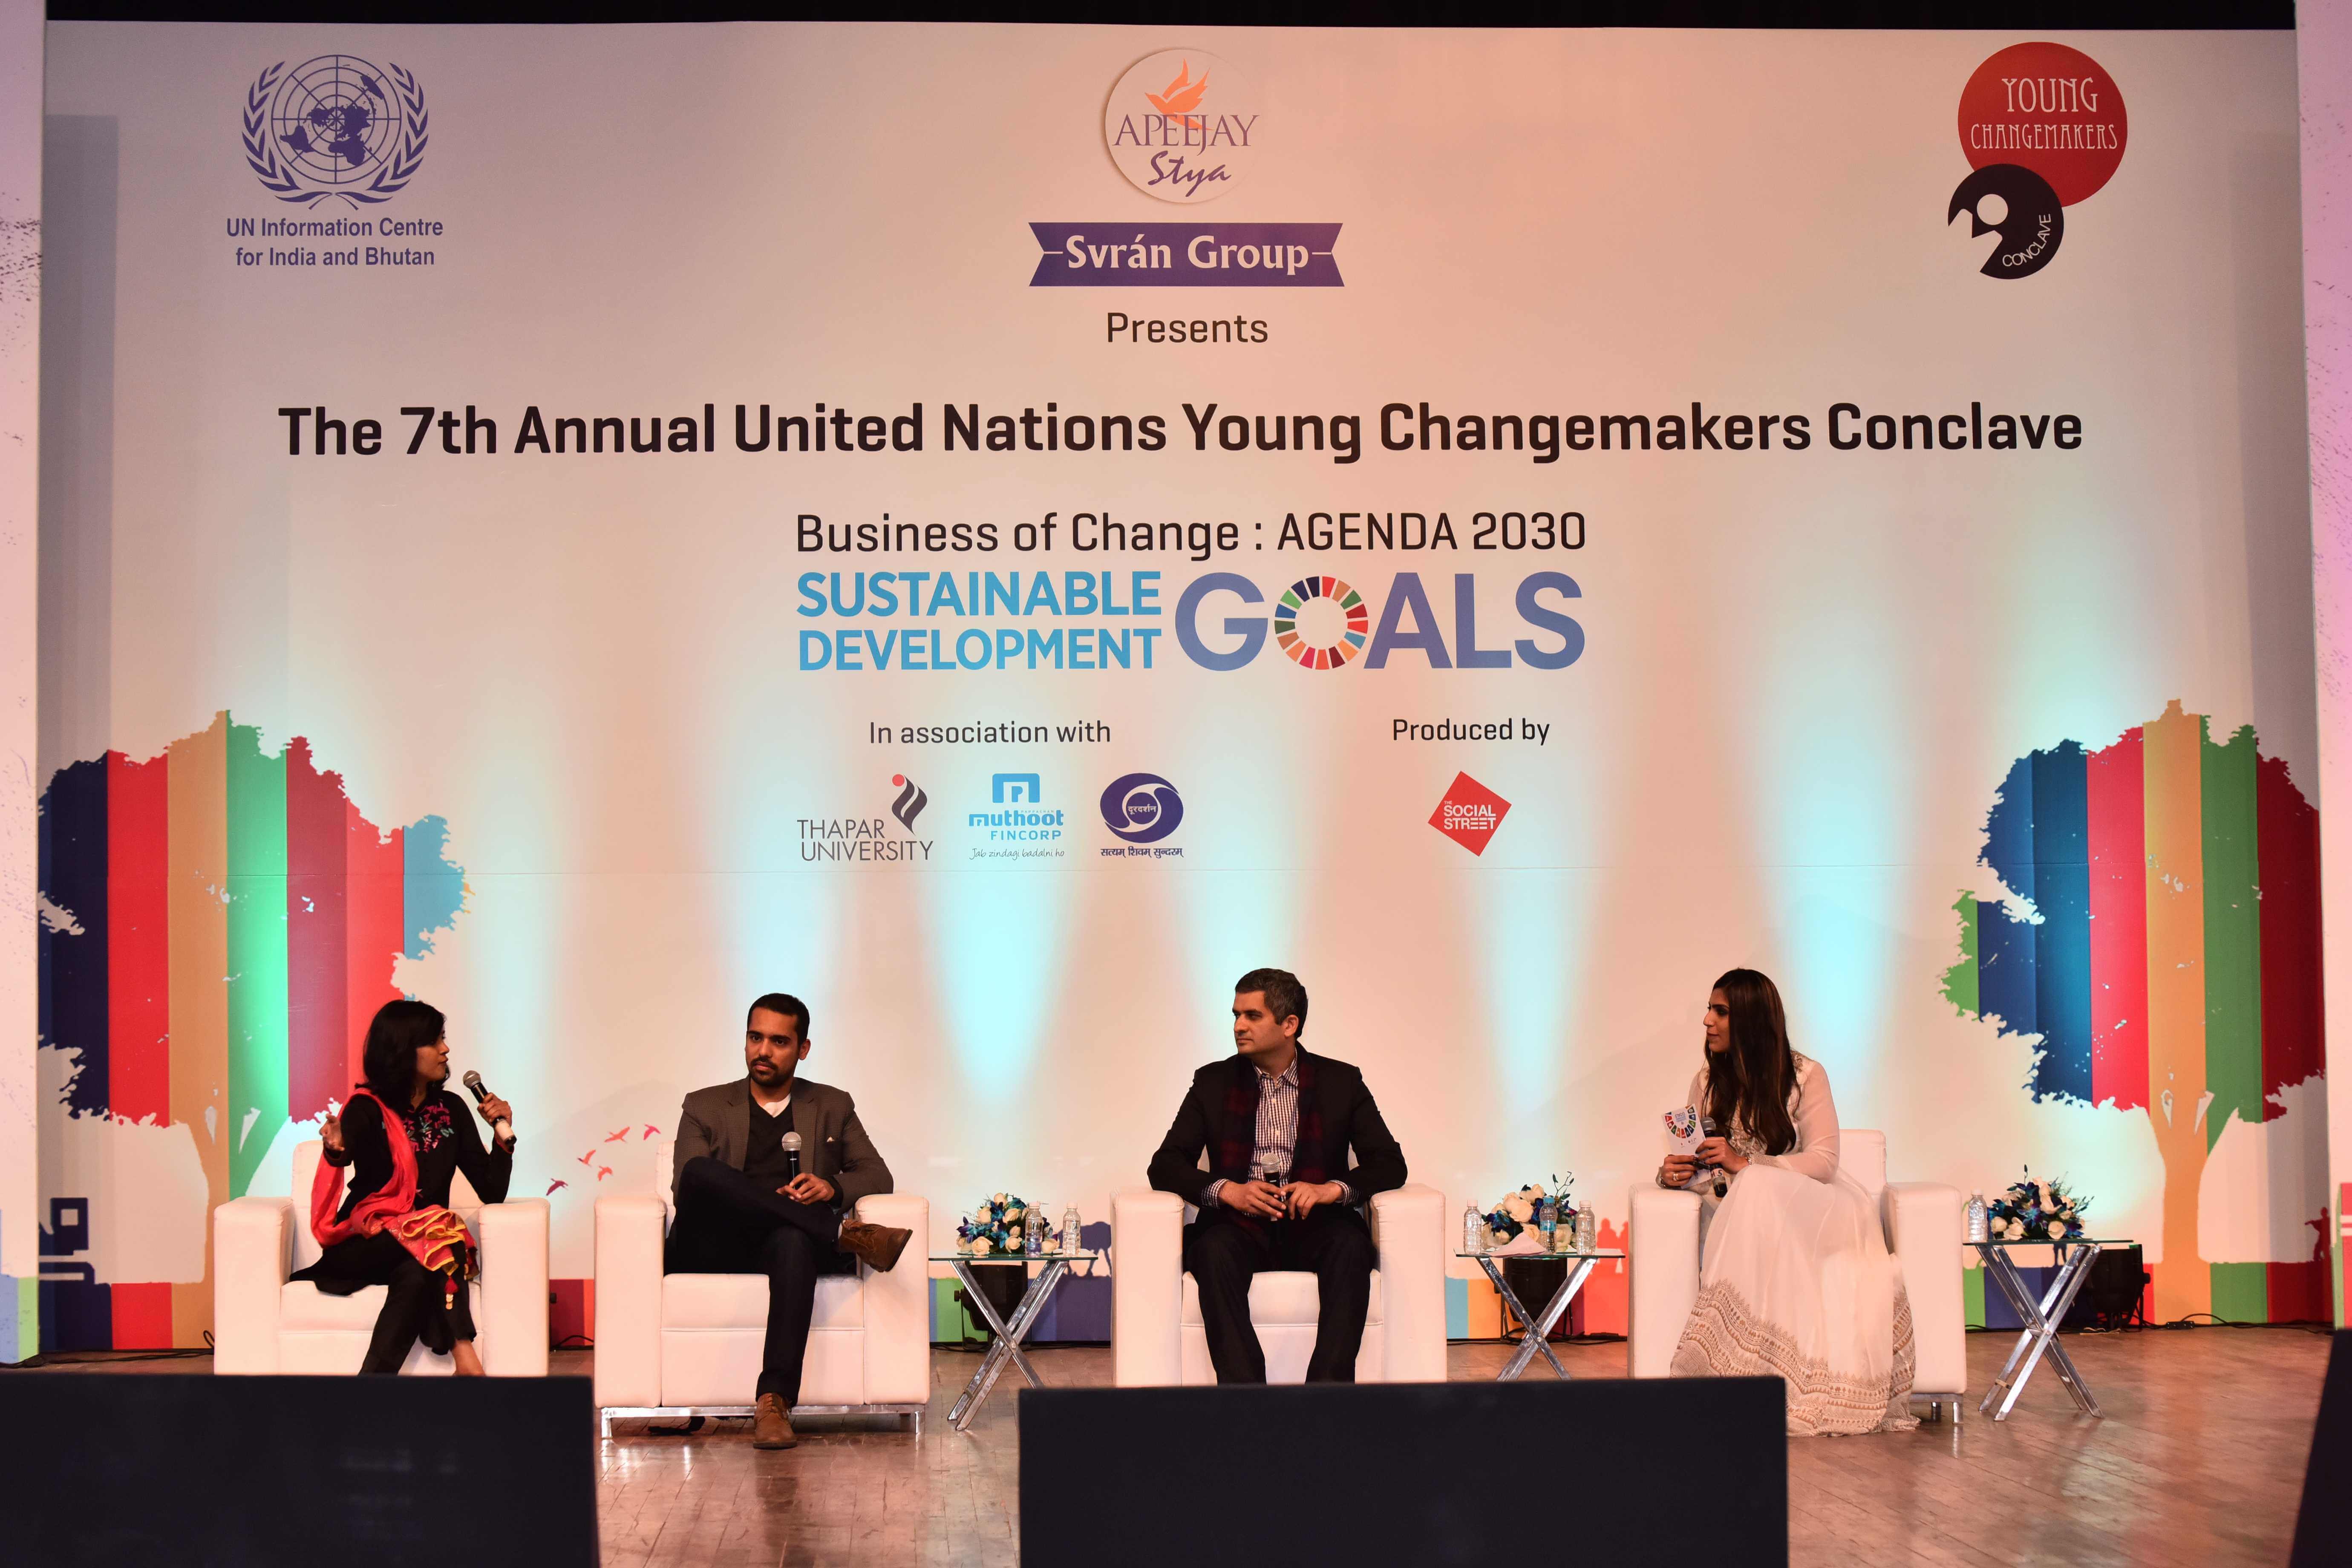 Young Change Makers Conclave